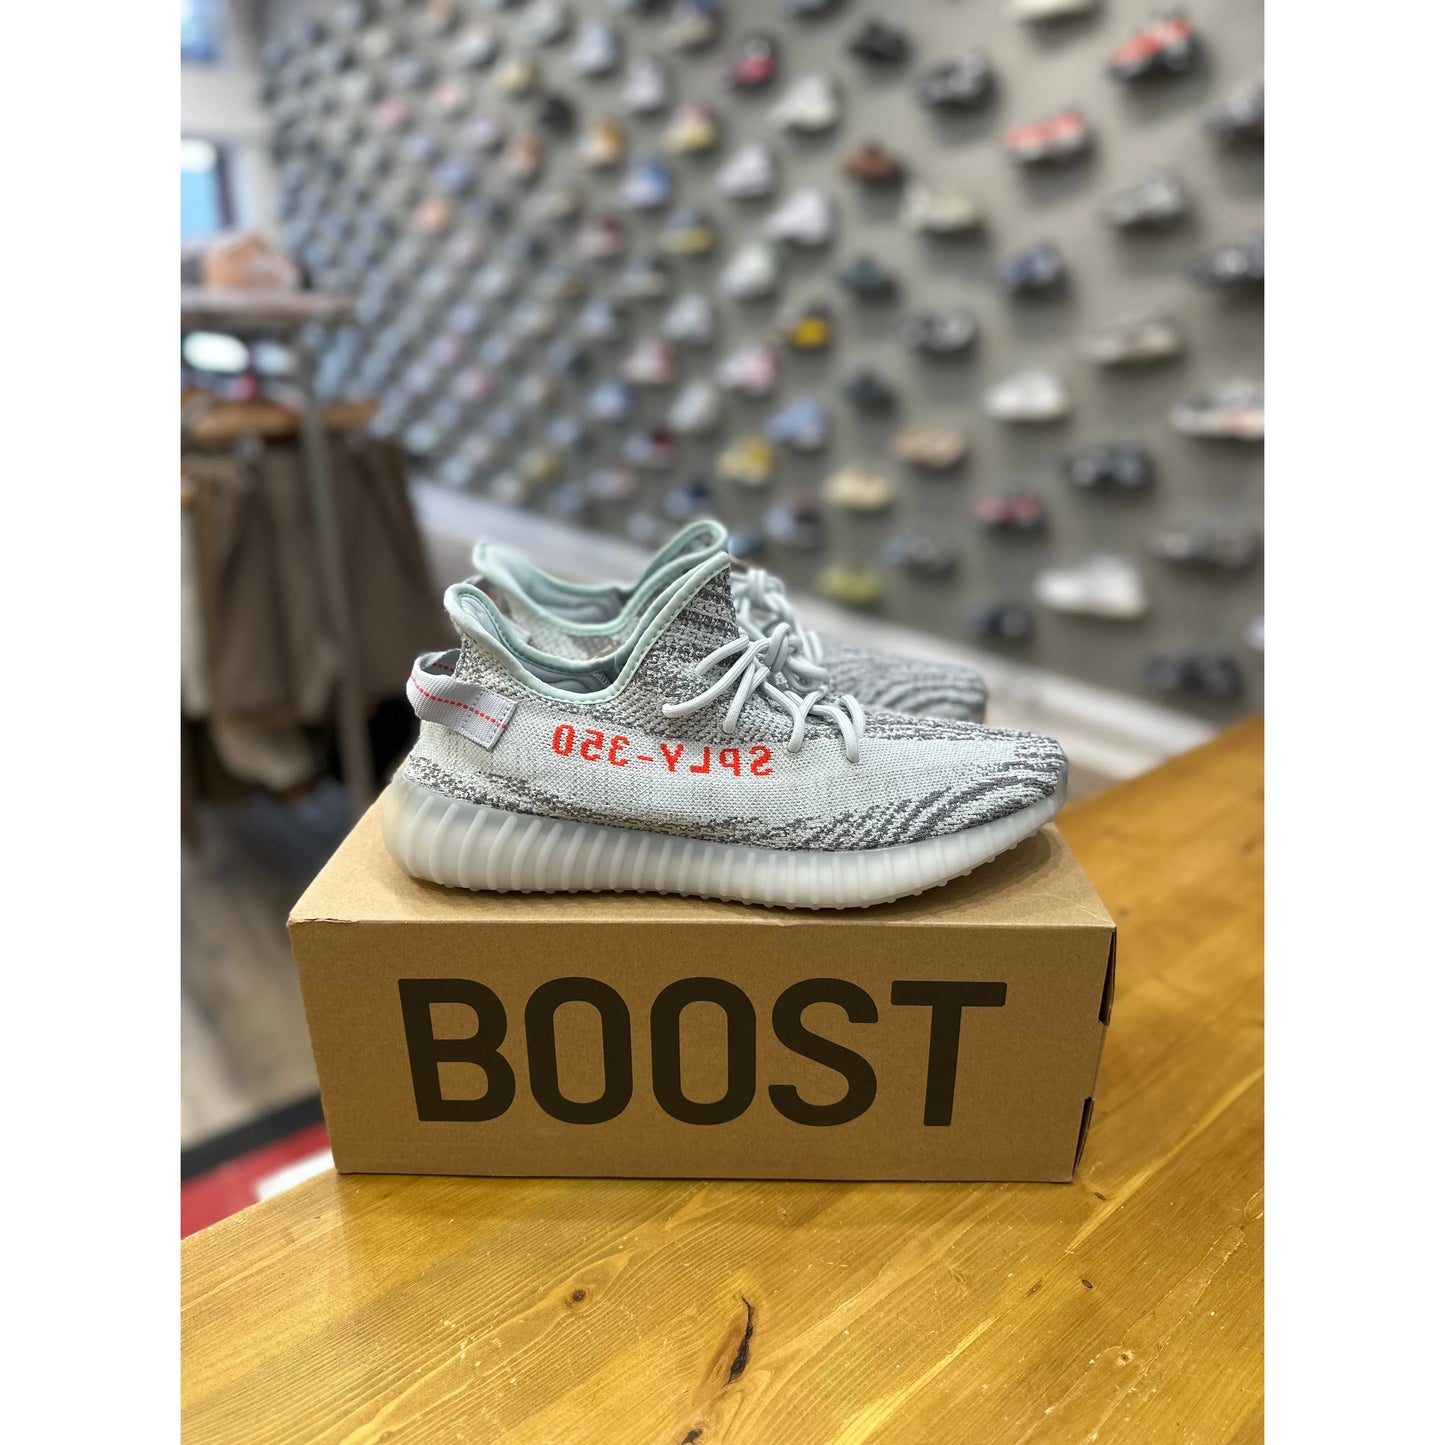 adidas Yeezy Boost 350 V2 Blue Tint by Yeezy from £265.99